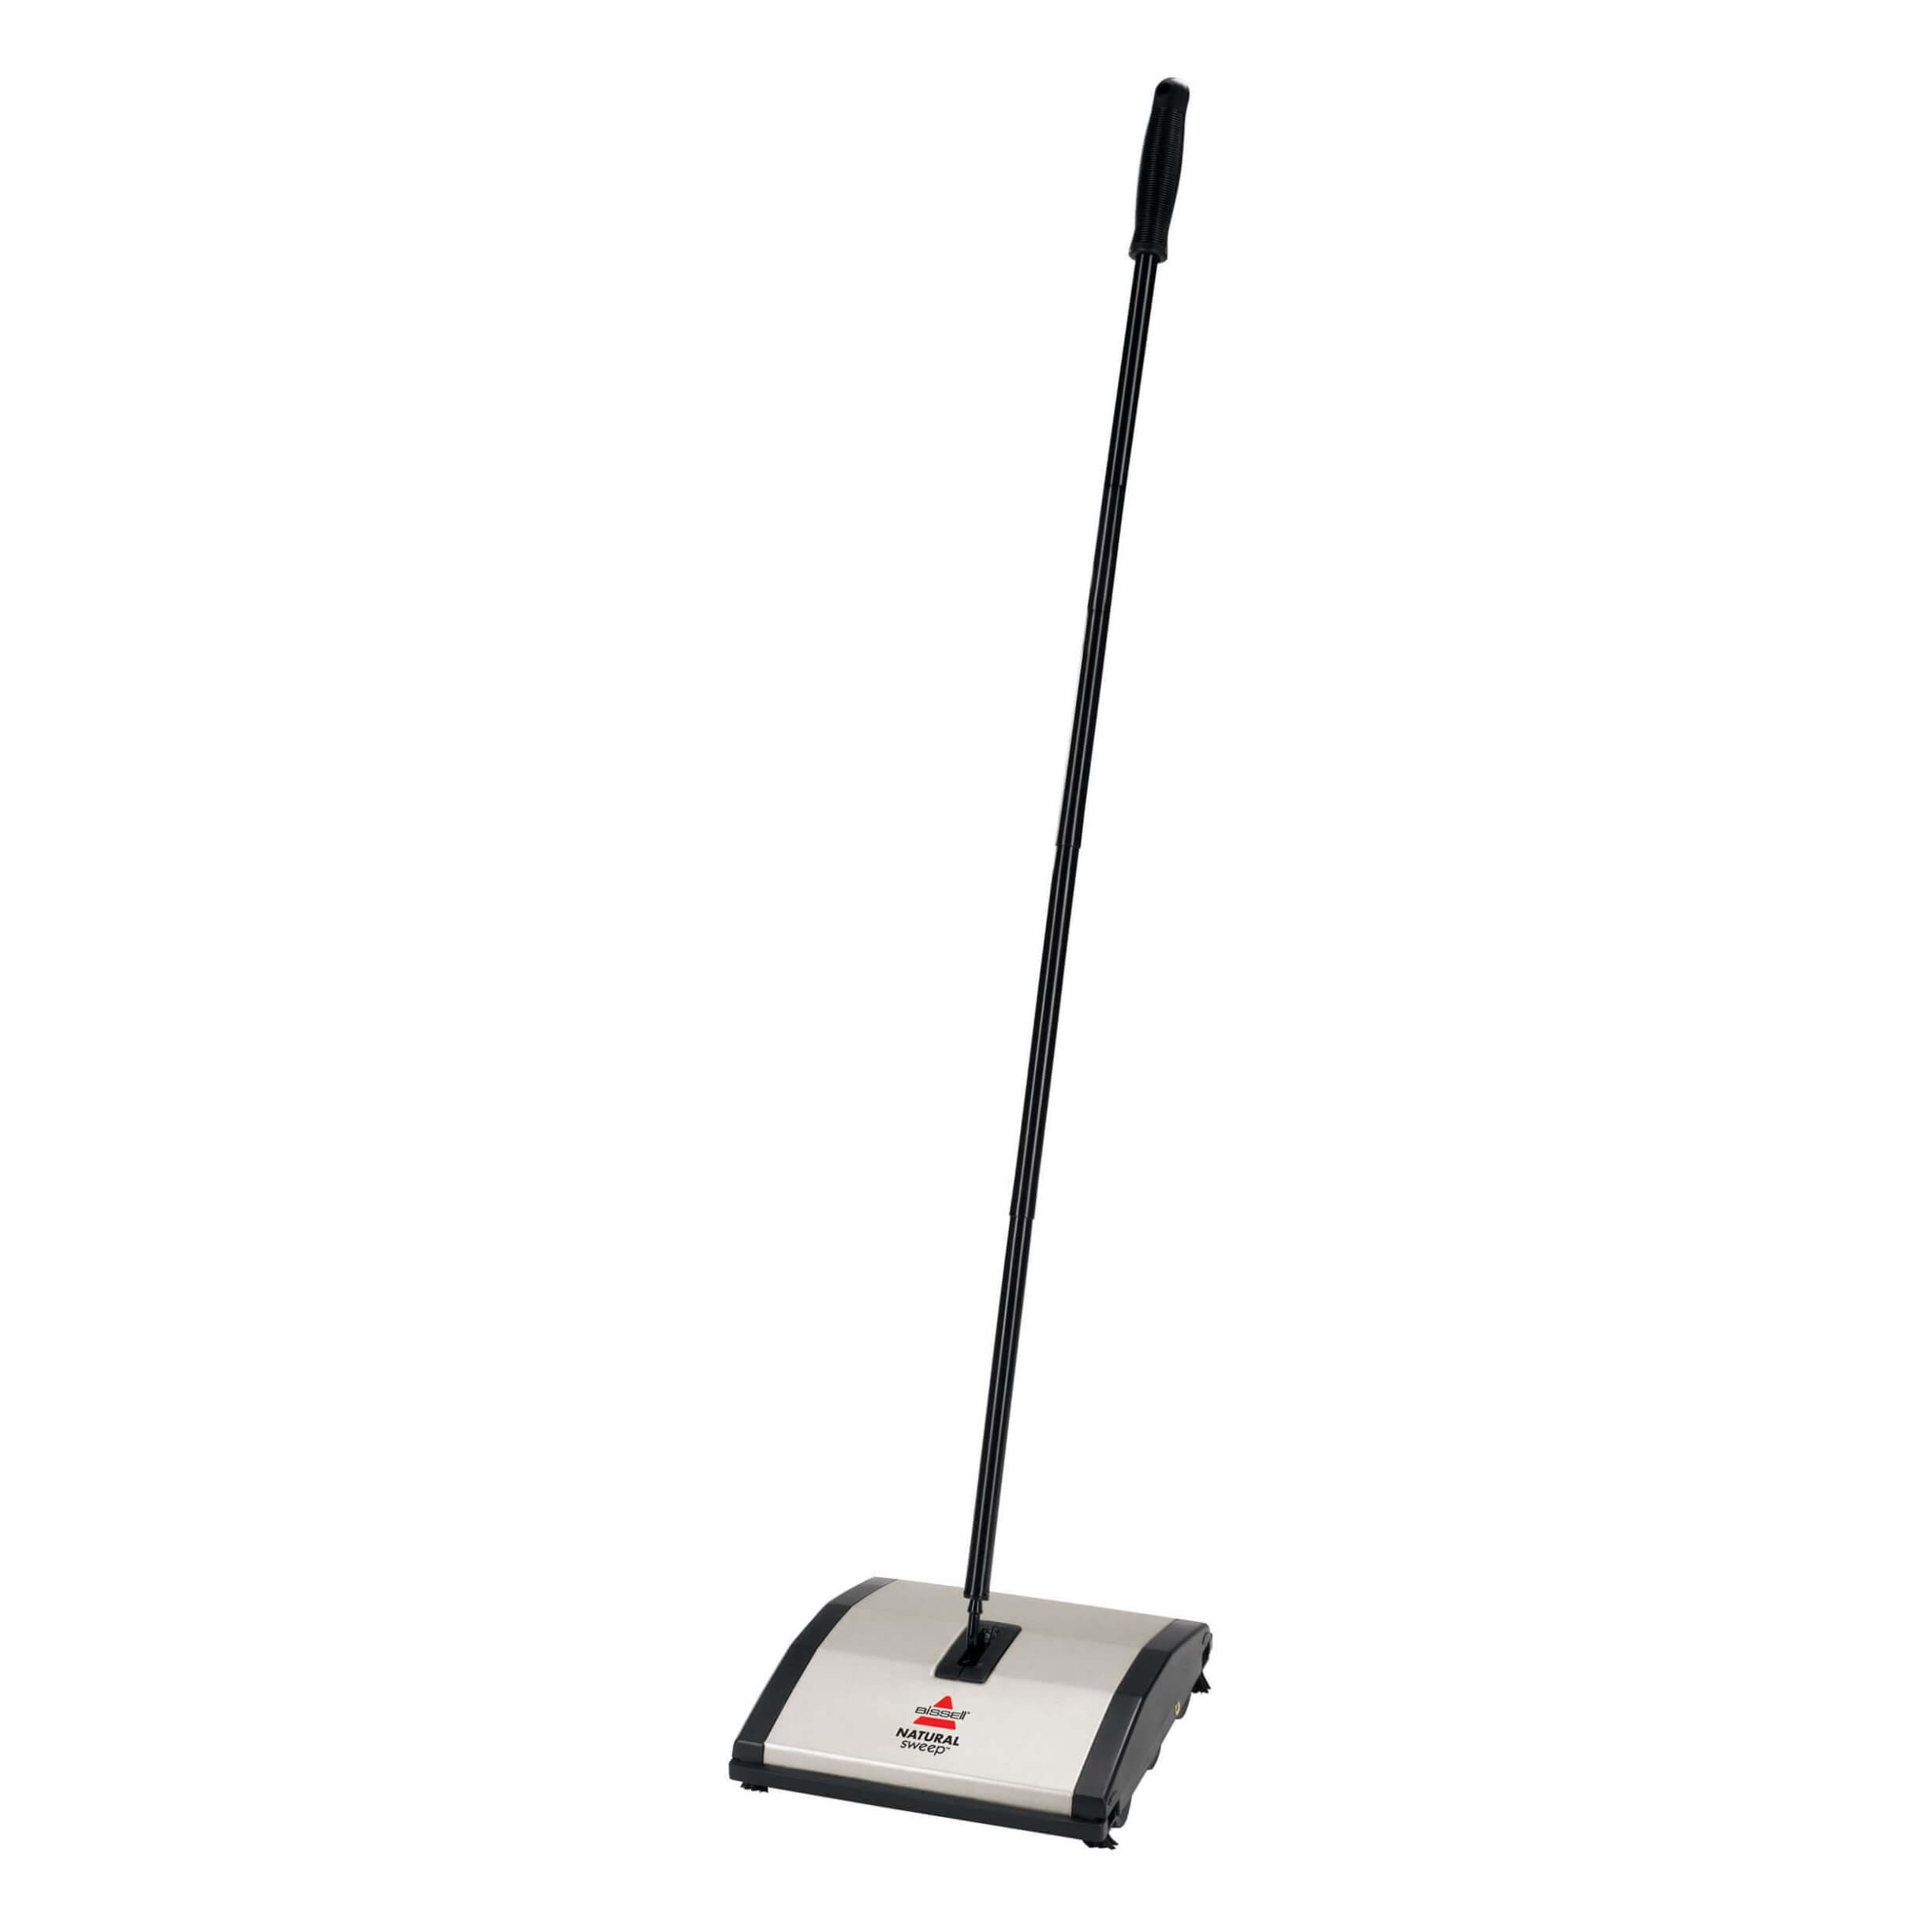 Eco Friendly Electric Cordless Rechargeable Floor Sweeper Cleaning